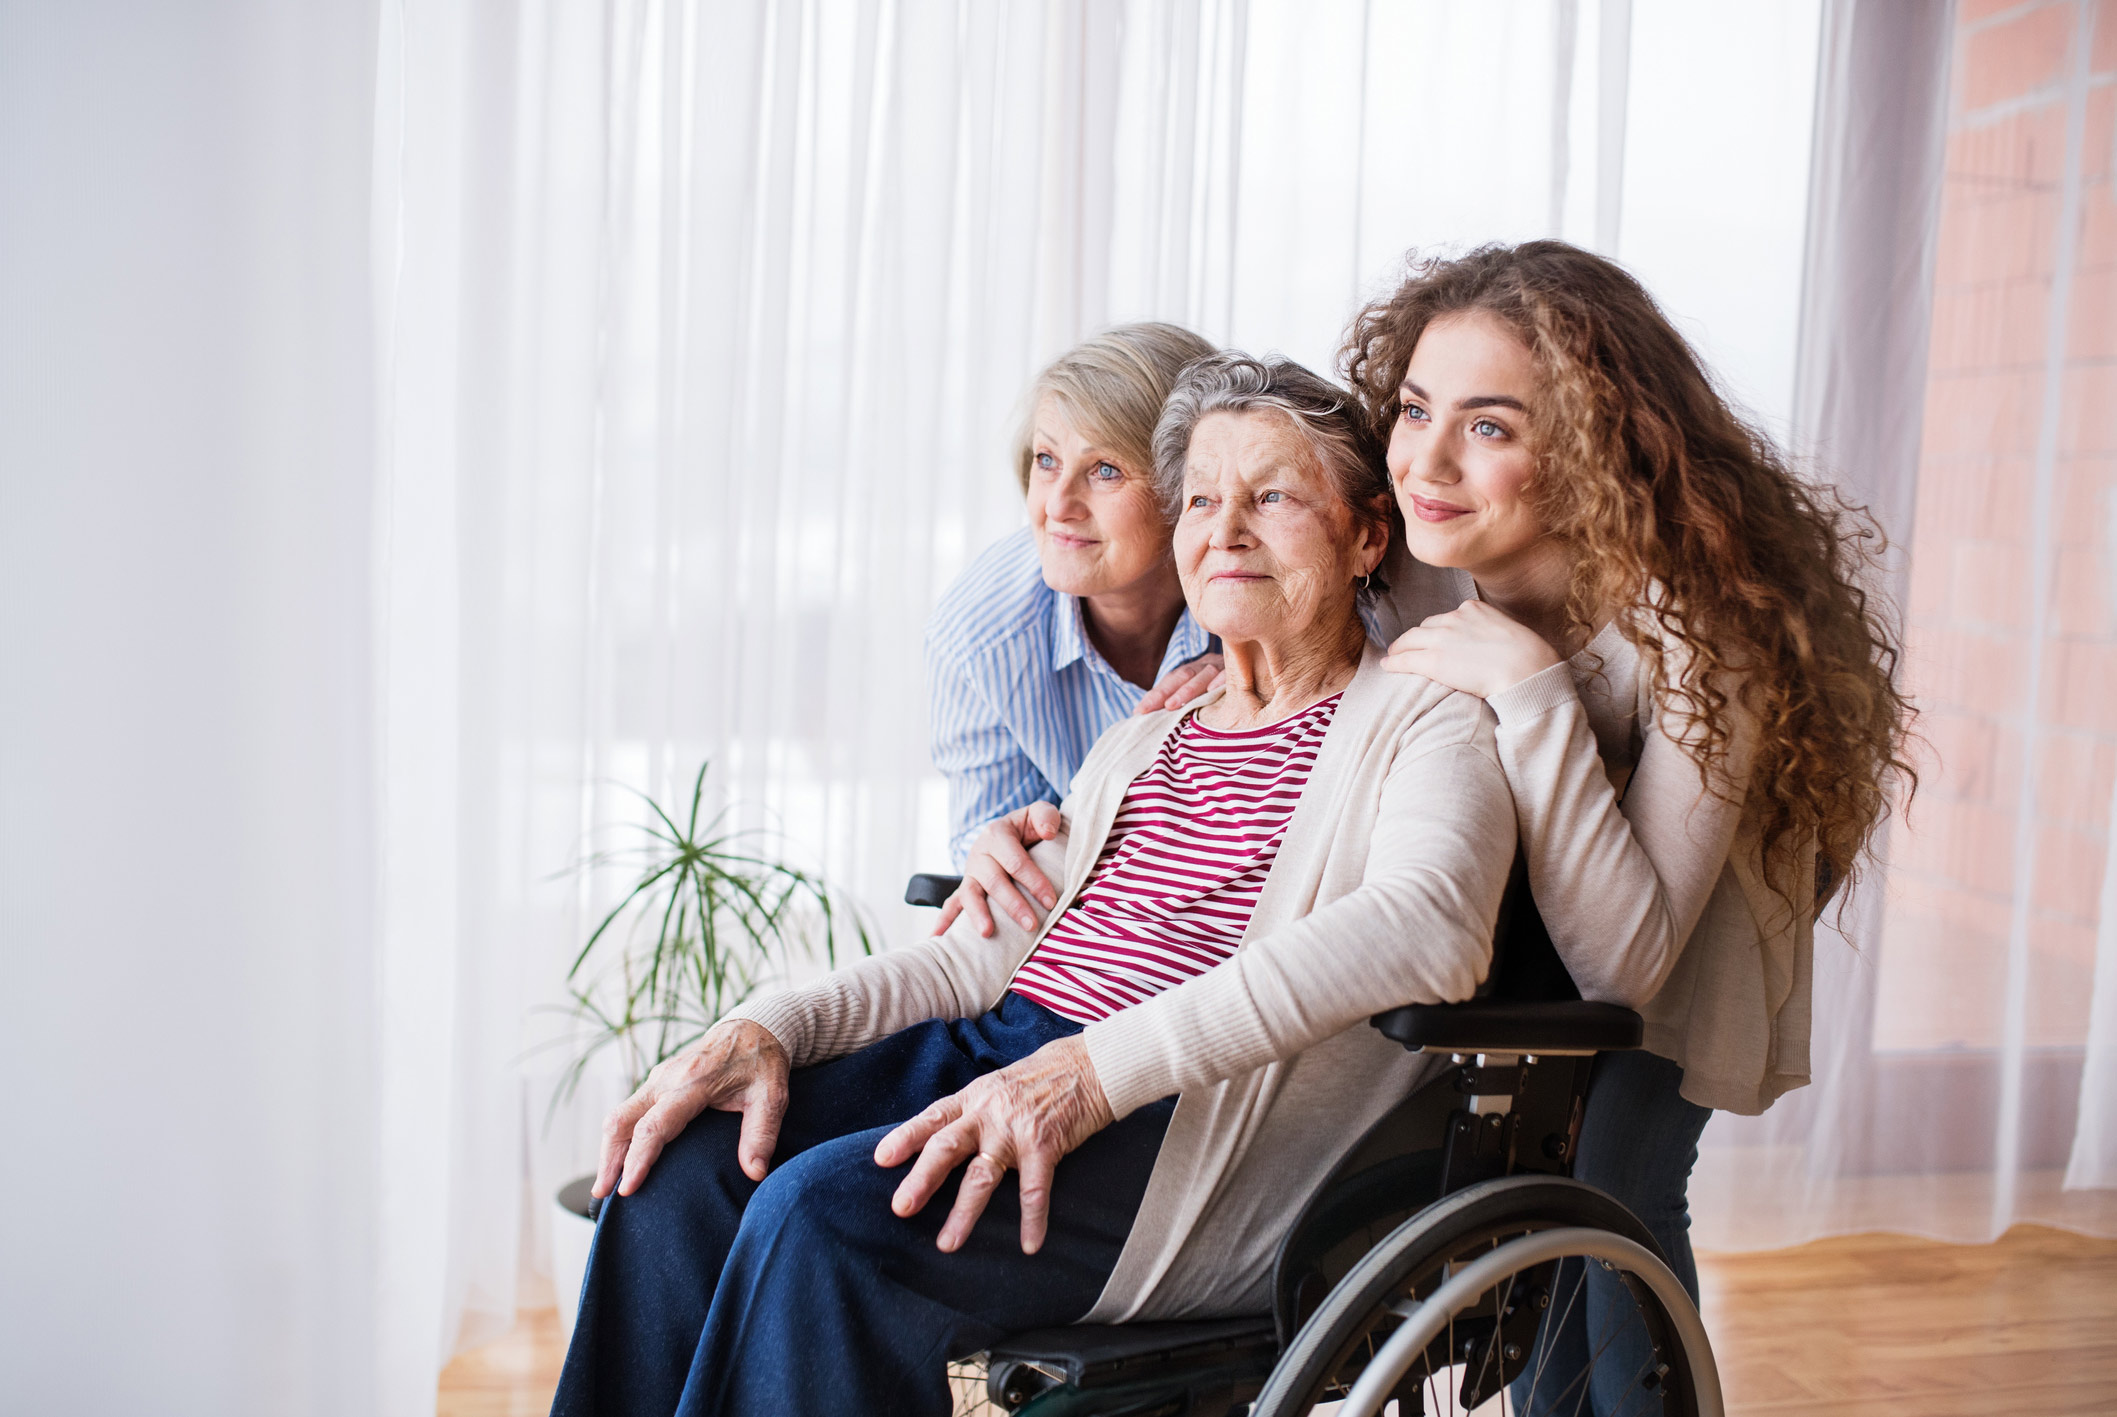 Aged Care Advice - Aged Care Financial Advice in Melbourne and Sydney